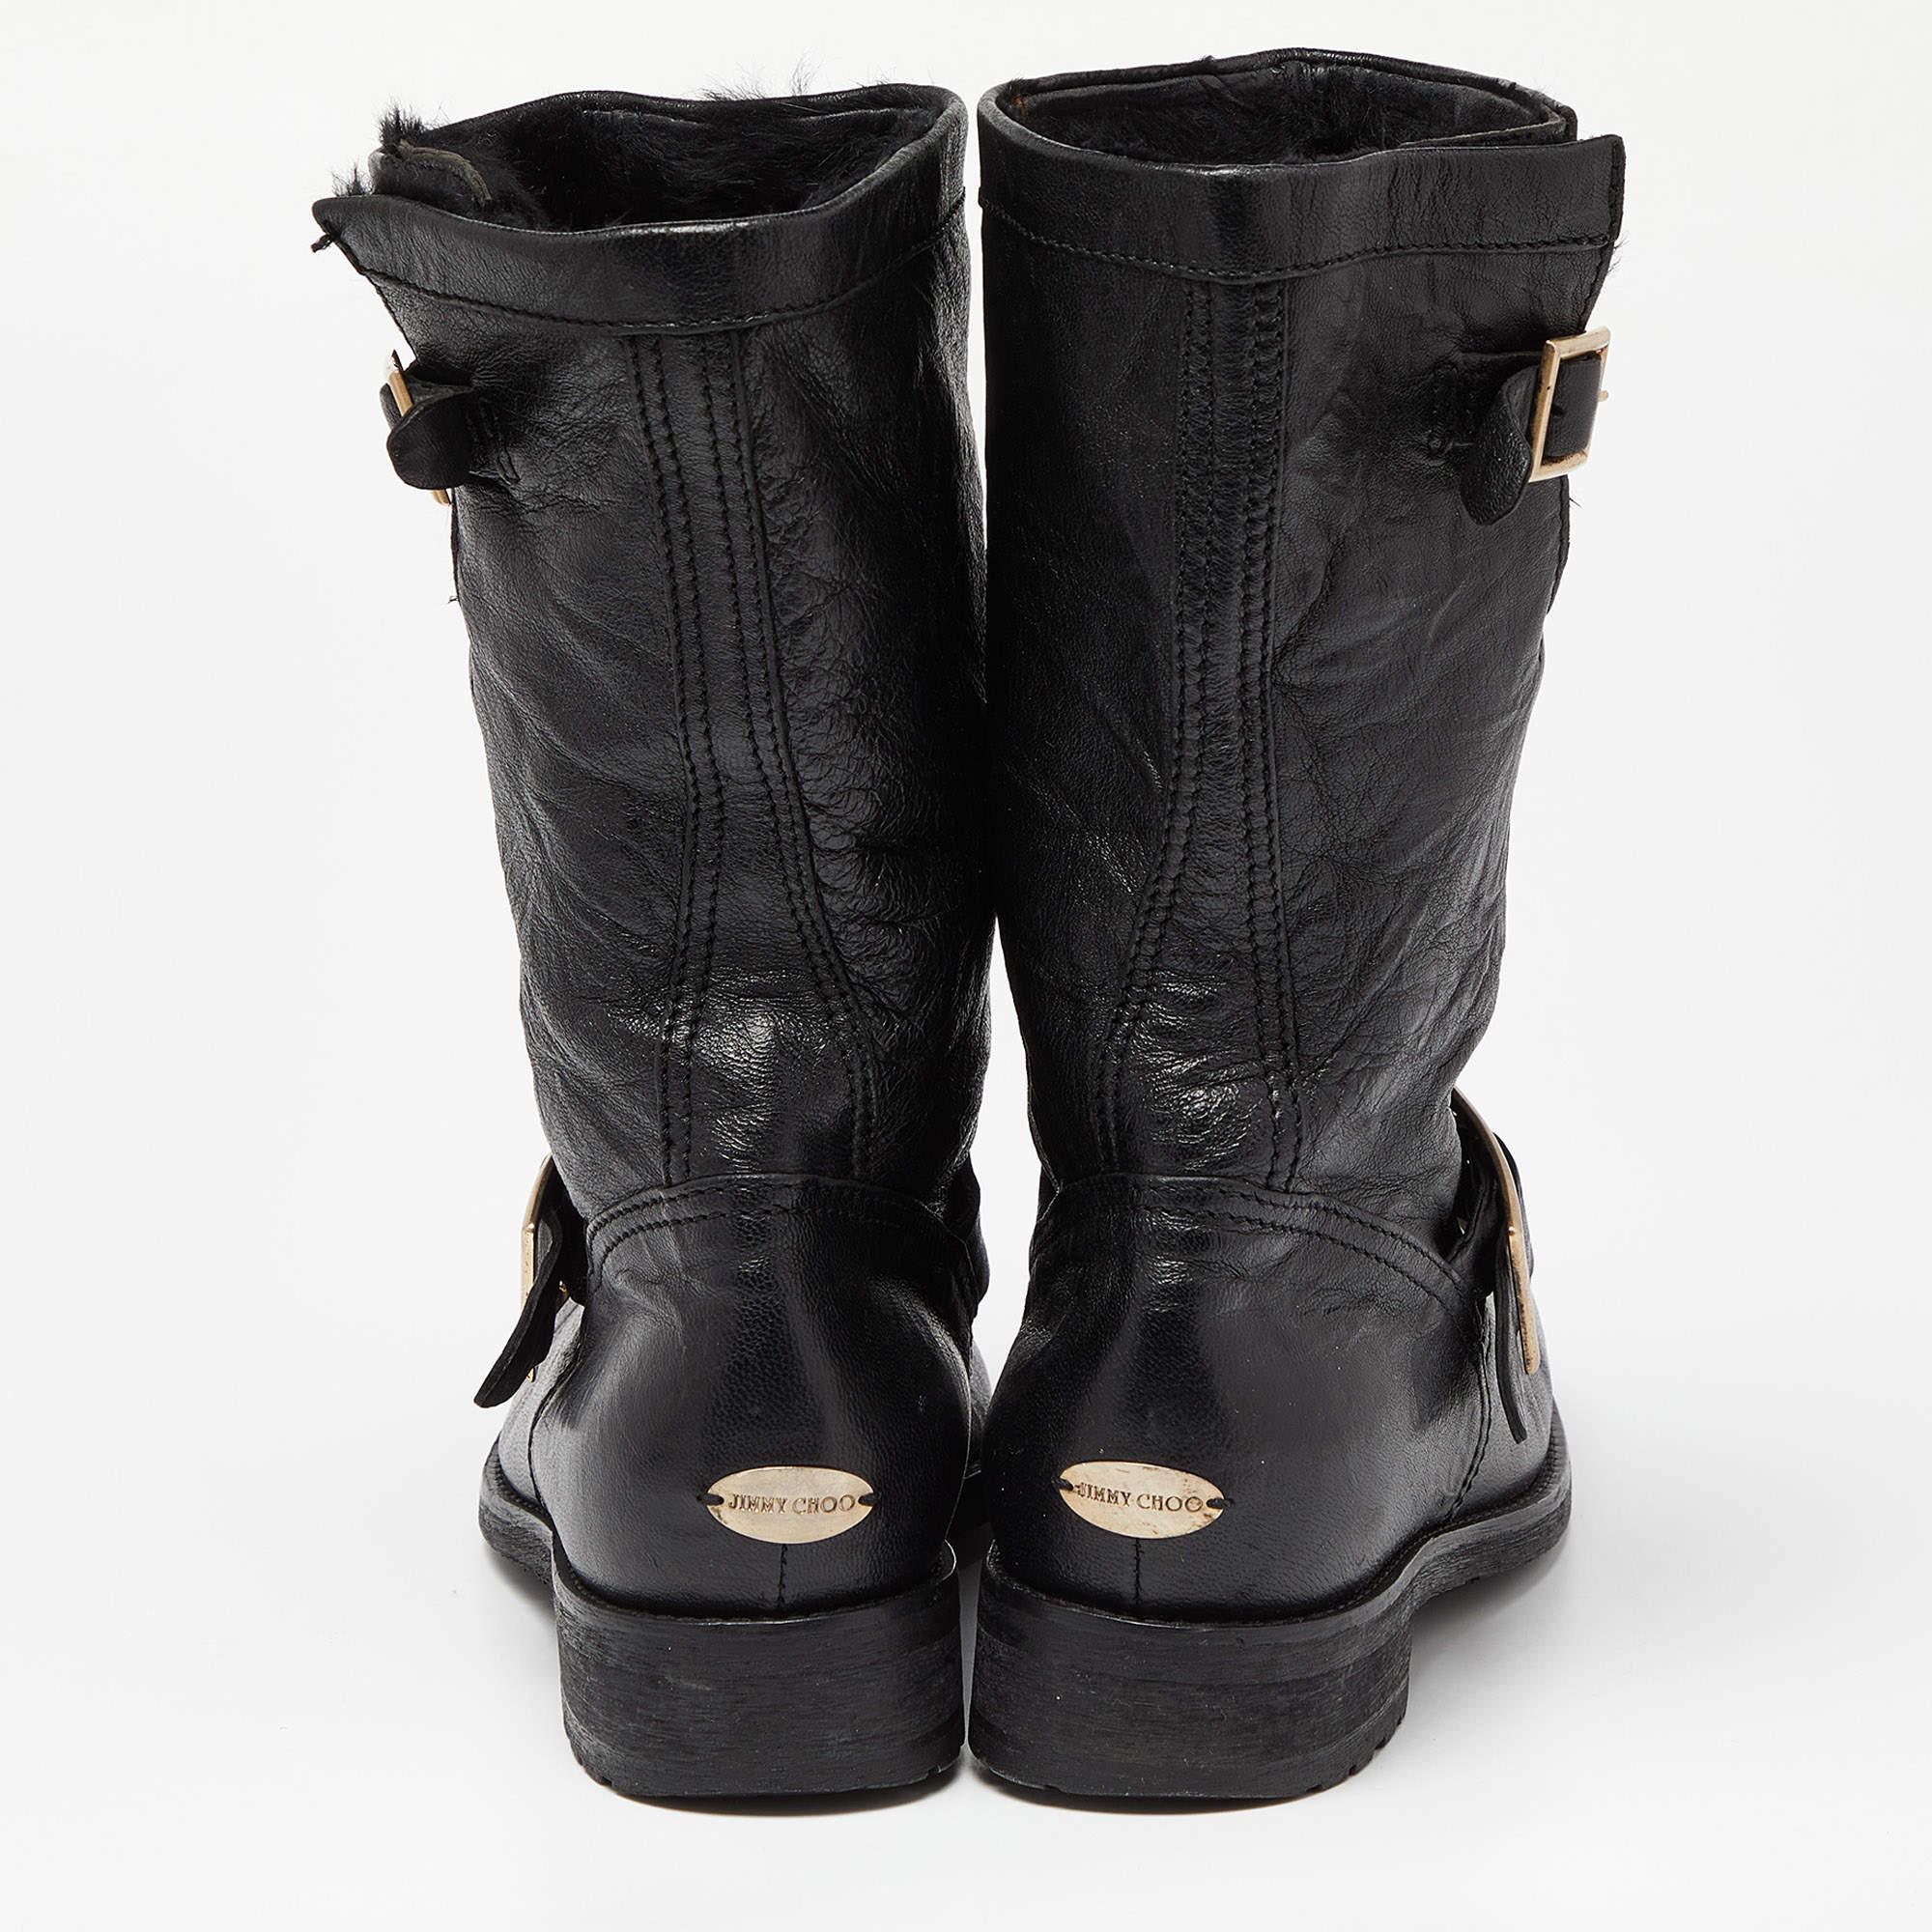 Jimmy Choo Black Leather Buckle Detail Mid Calf Biker Boots Size 38 For Sale 2